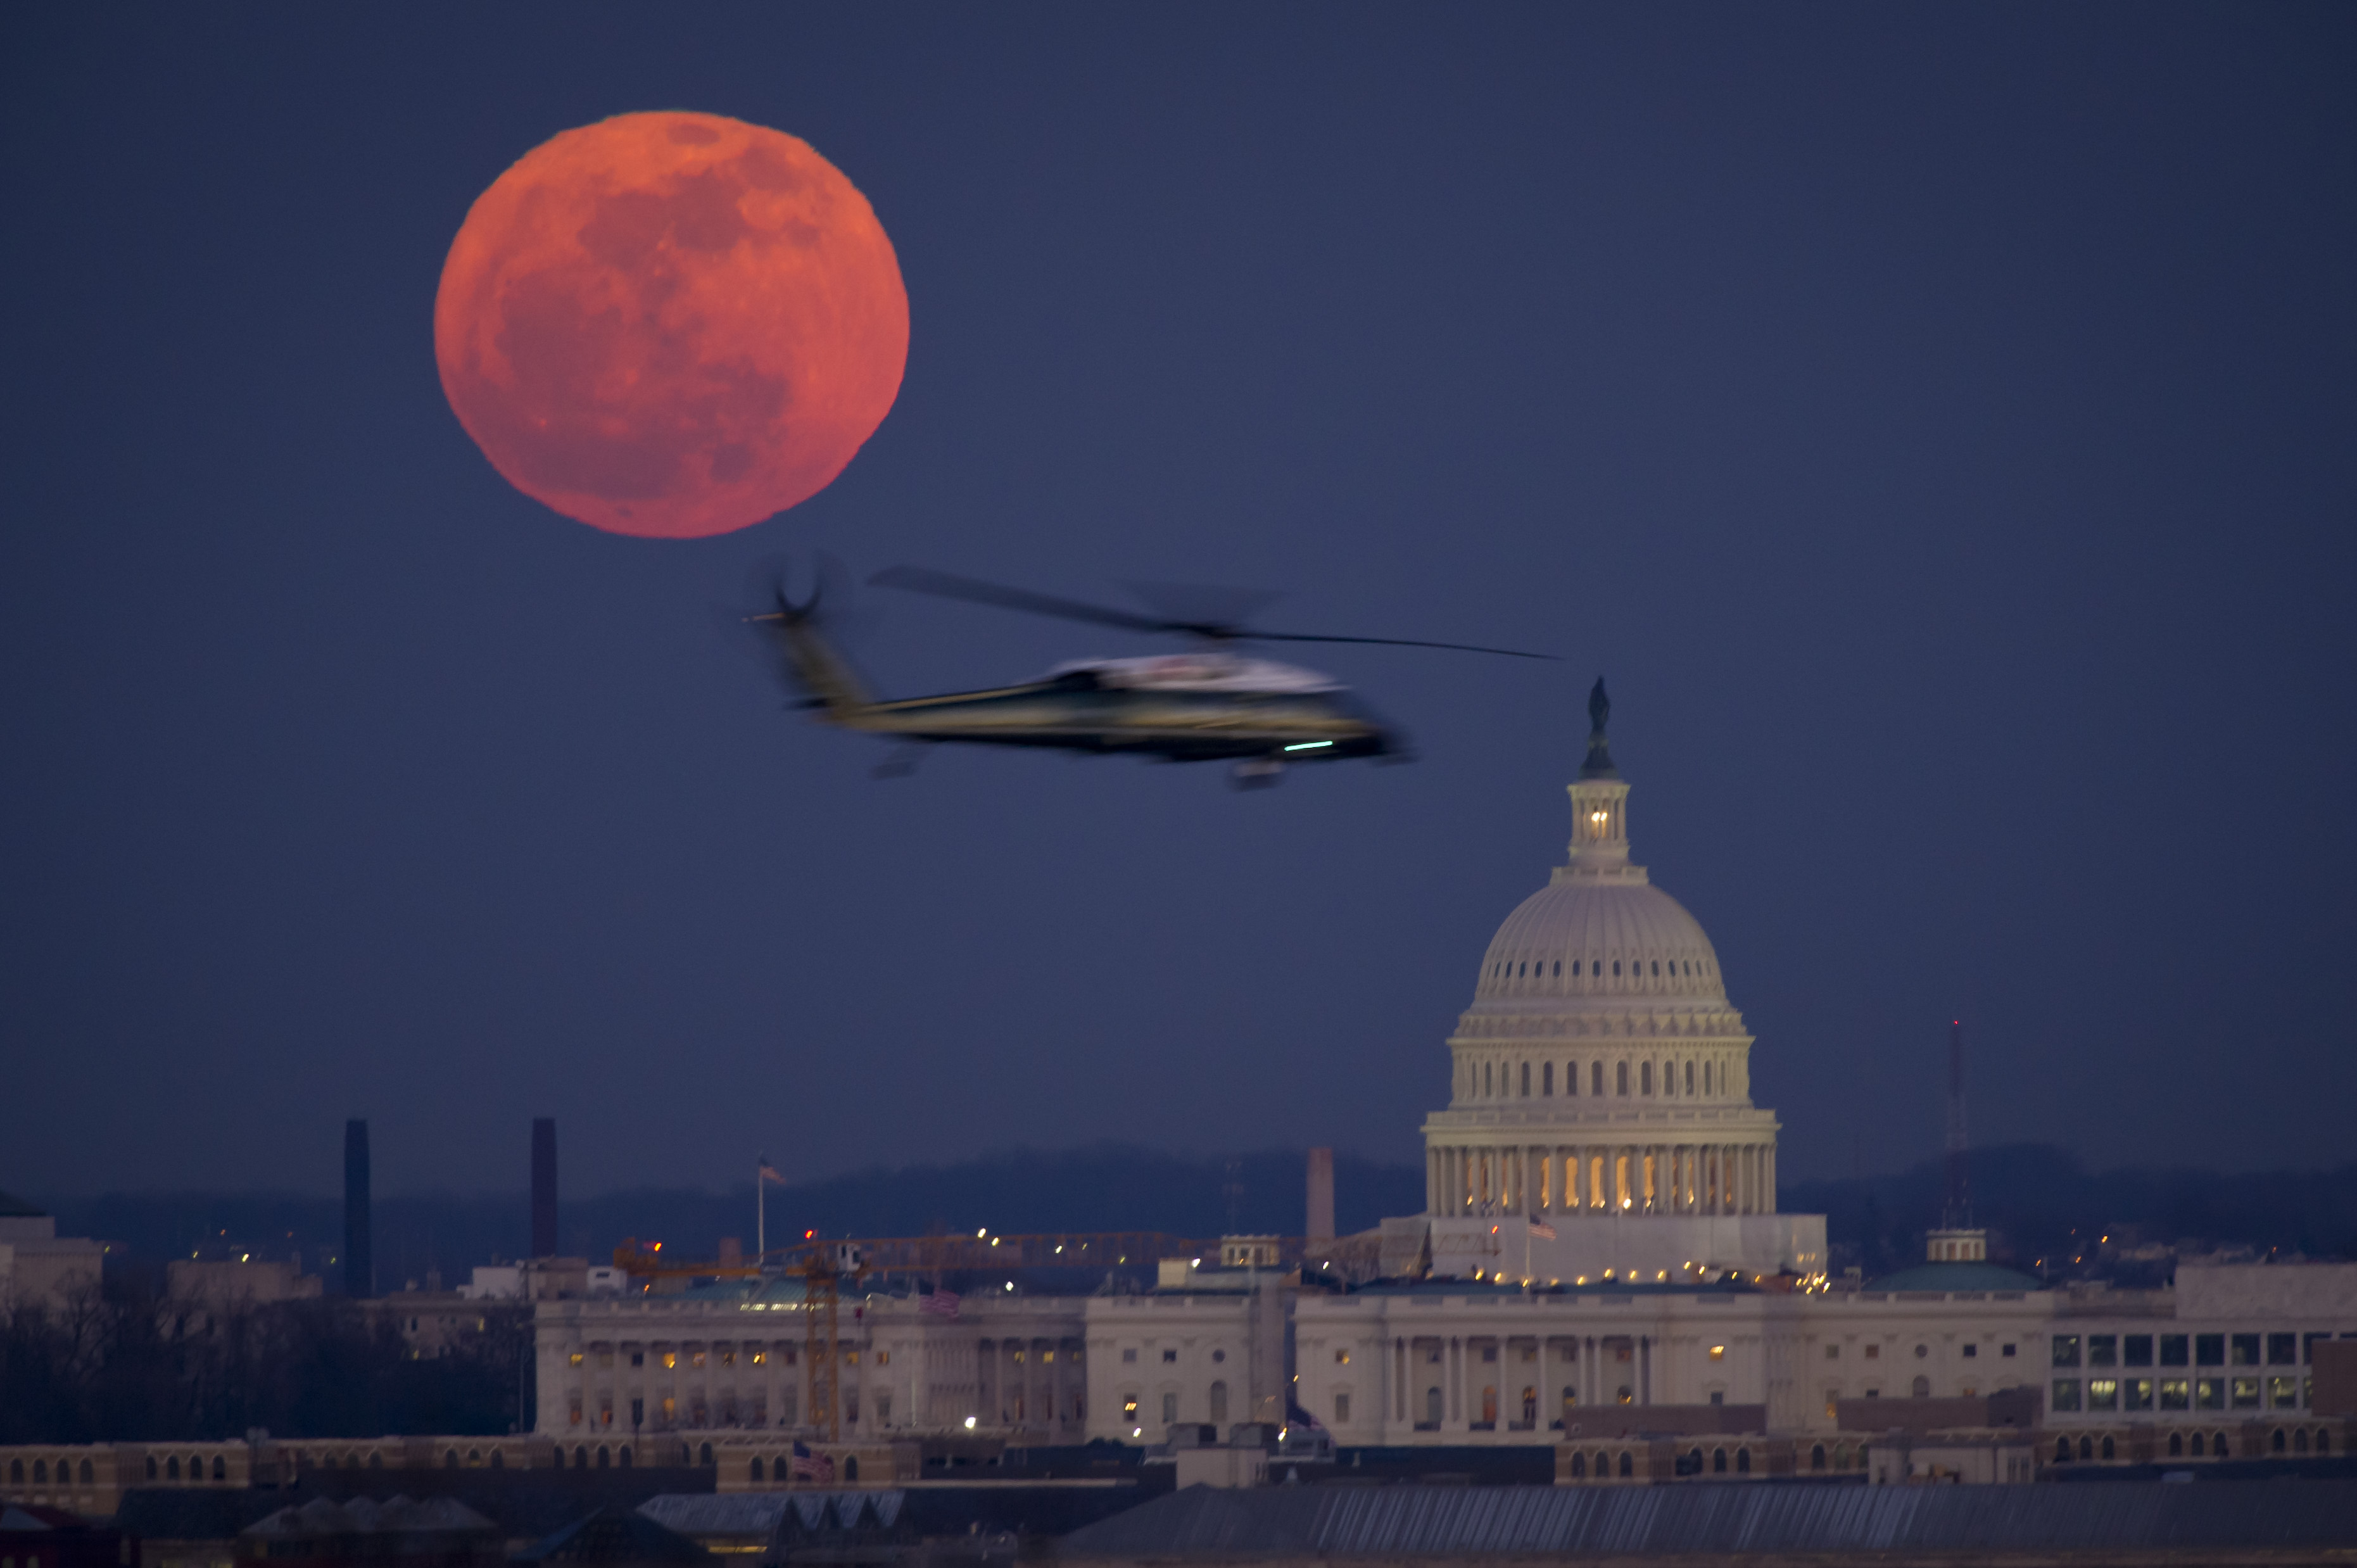 A United States Marine Corps helicopter is seen flying through this scene of the full Moon and the U.S. Capitol on Tuesday, Feb. 7, 2012 from Arlington National Cemetery. Photo Credit: (NASA/Bill Ingalls)